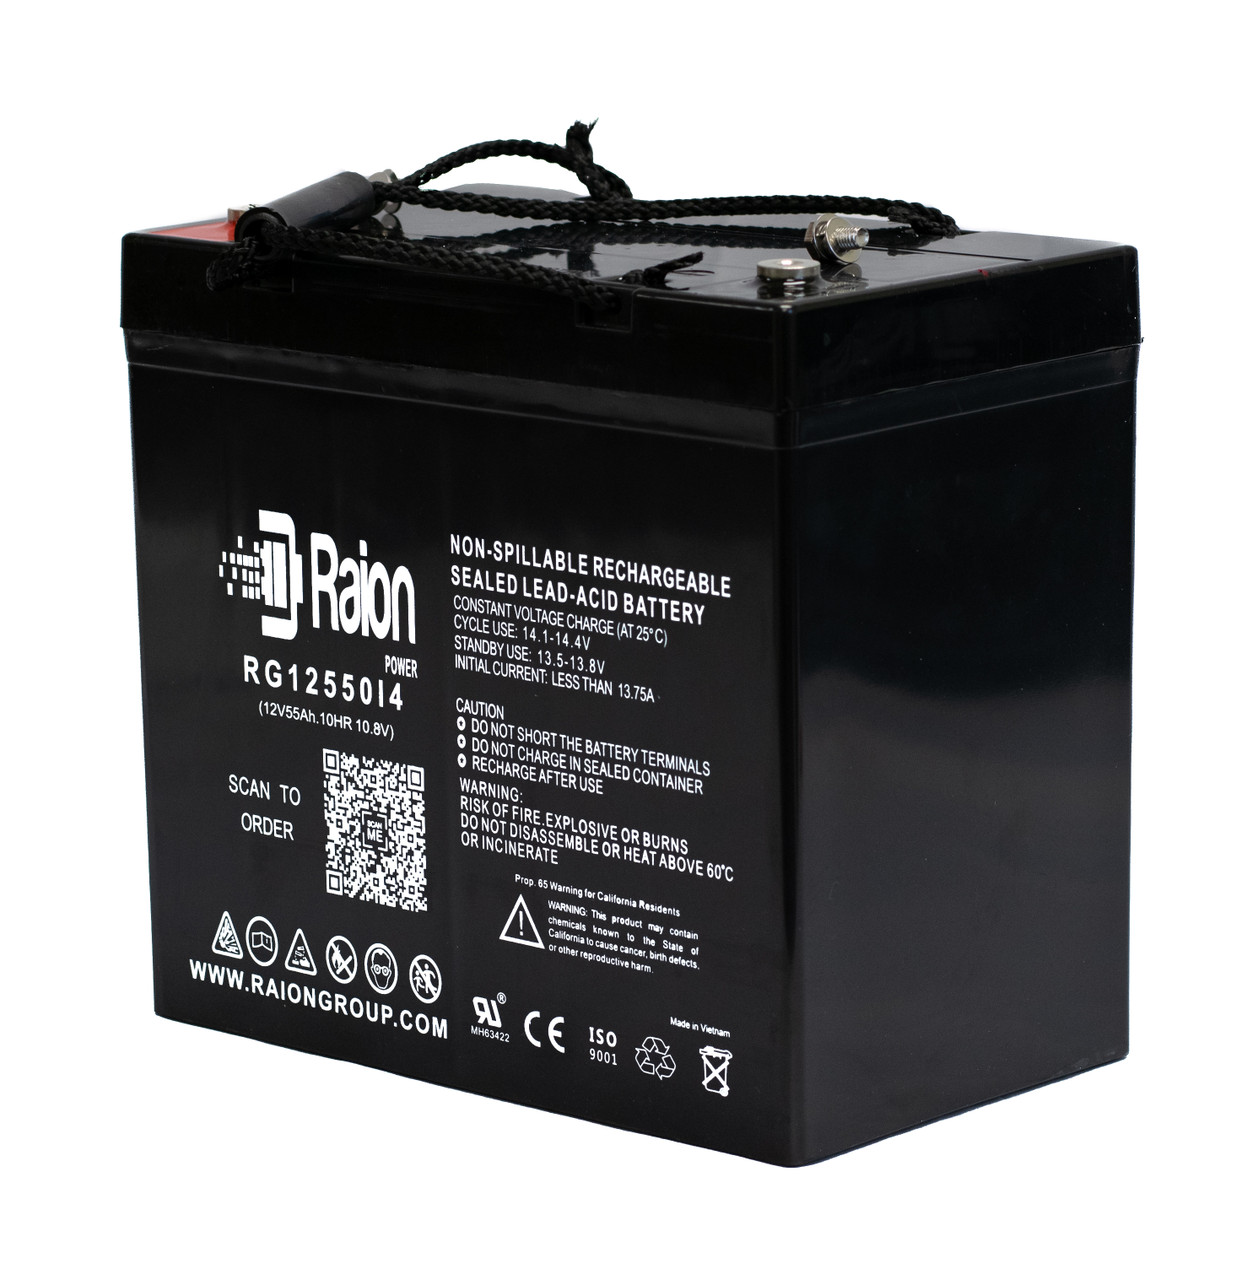 Raion Power Replacement 12V 55Ah Battery for Weida HX12-50 - 1 Pack